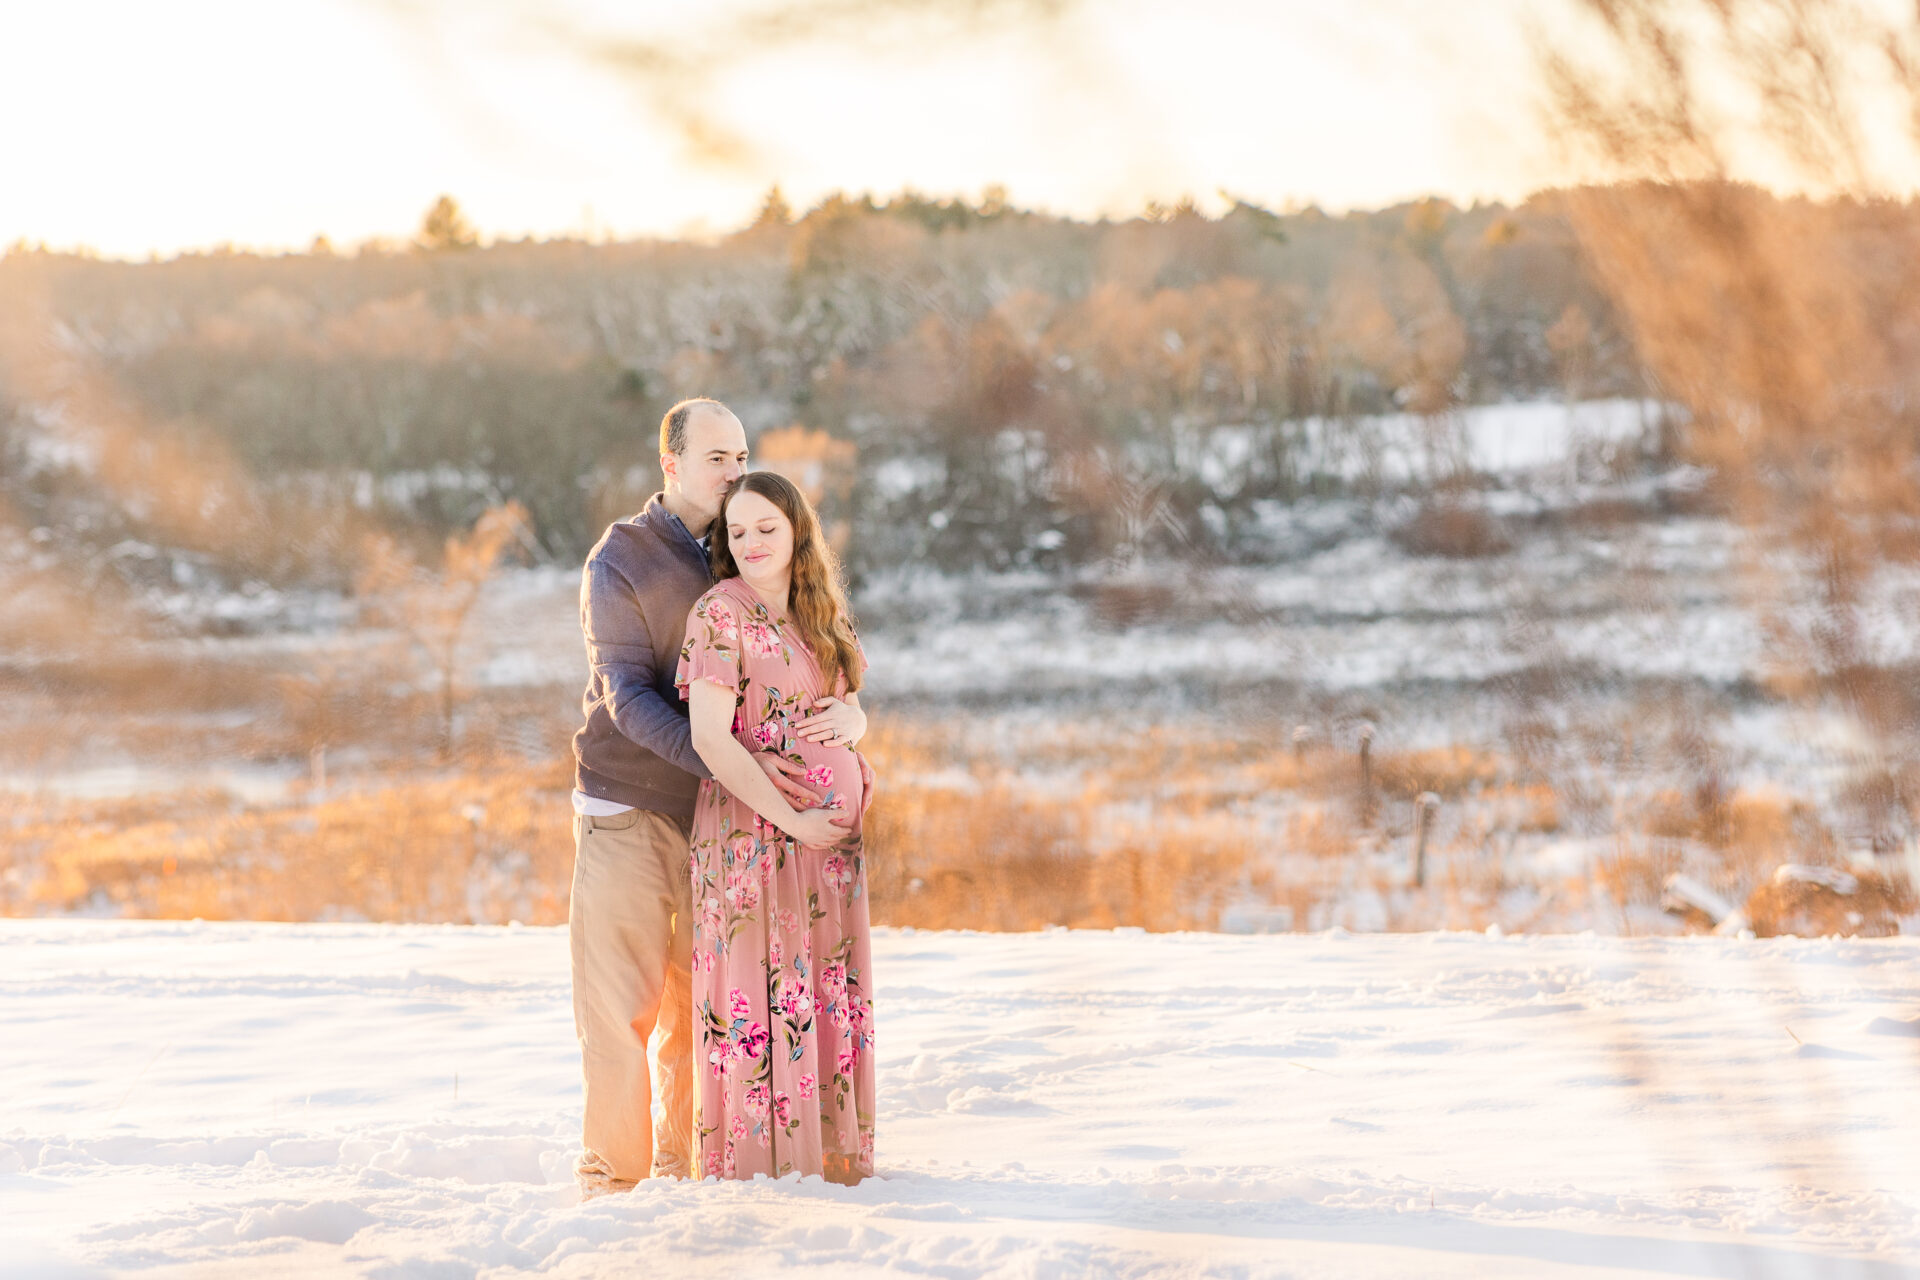 snowy winter maternity session with Sara Sniderman Photography at Medfield State Hospital in Medfield Massachusetts